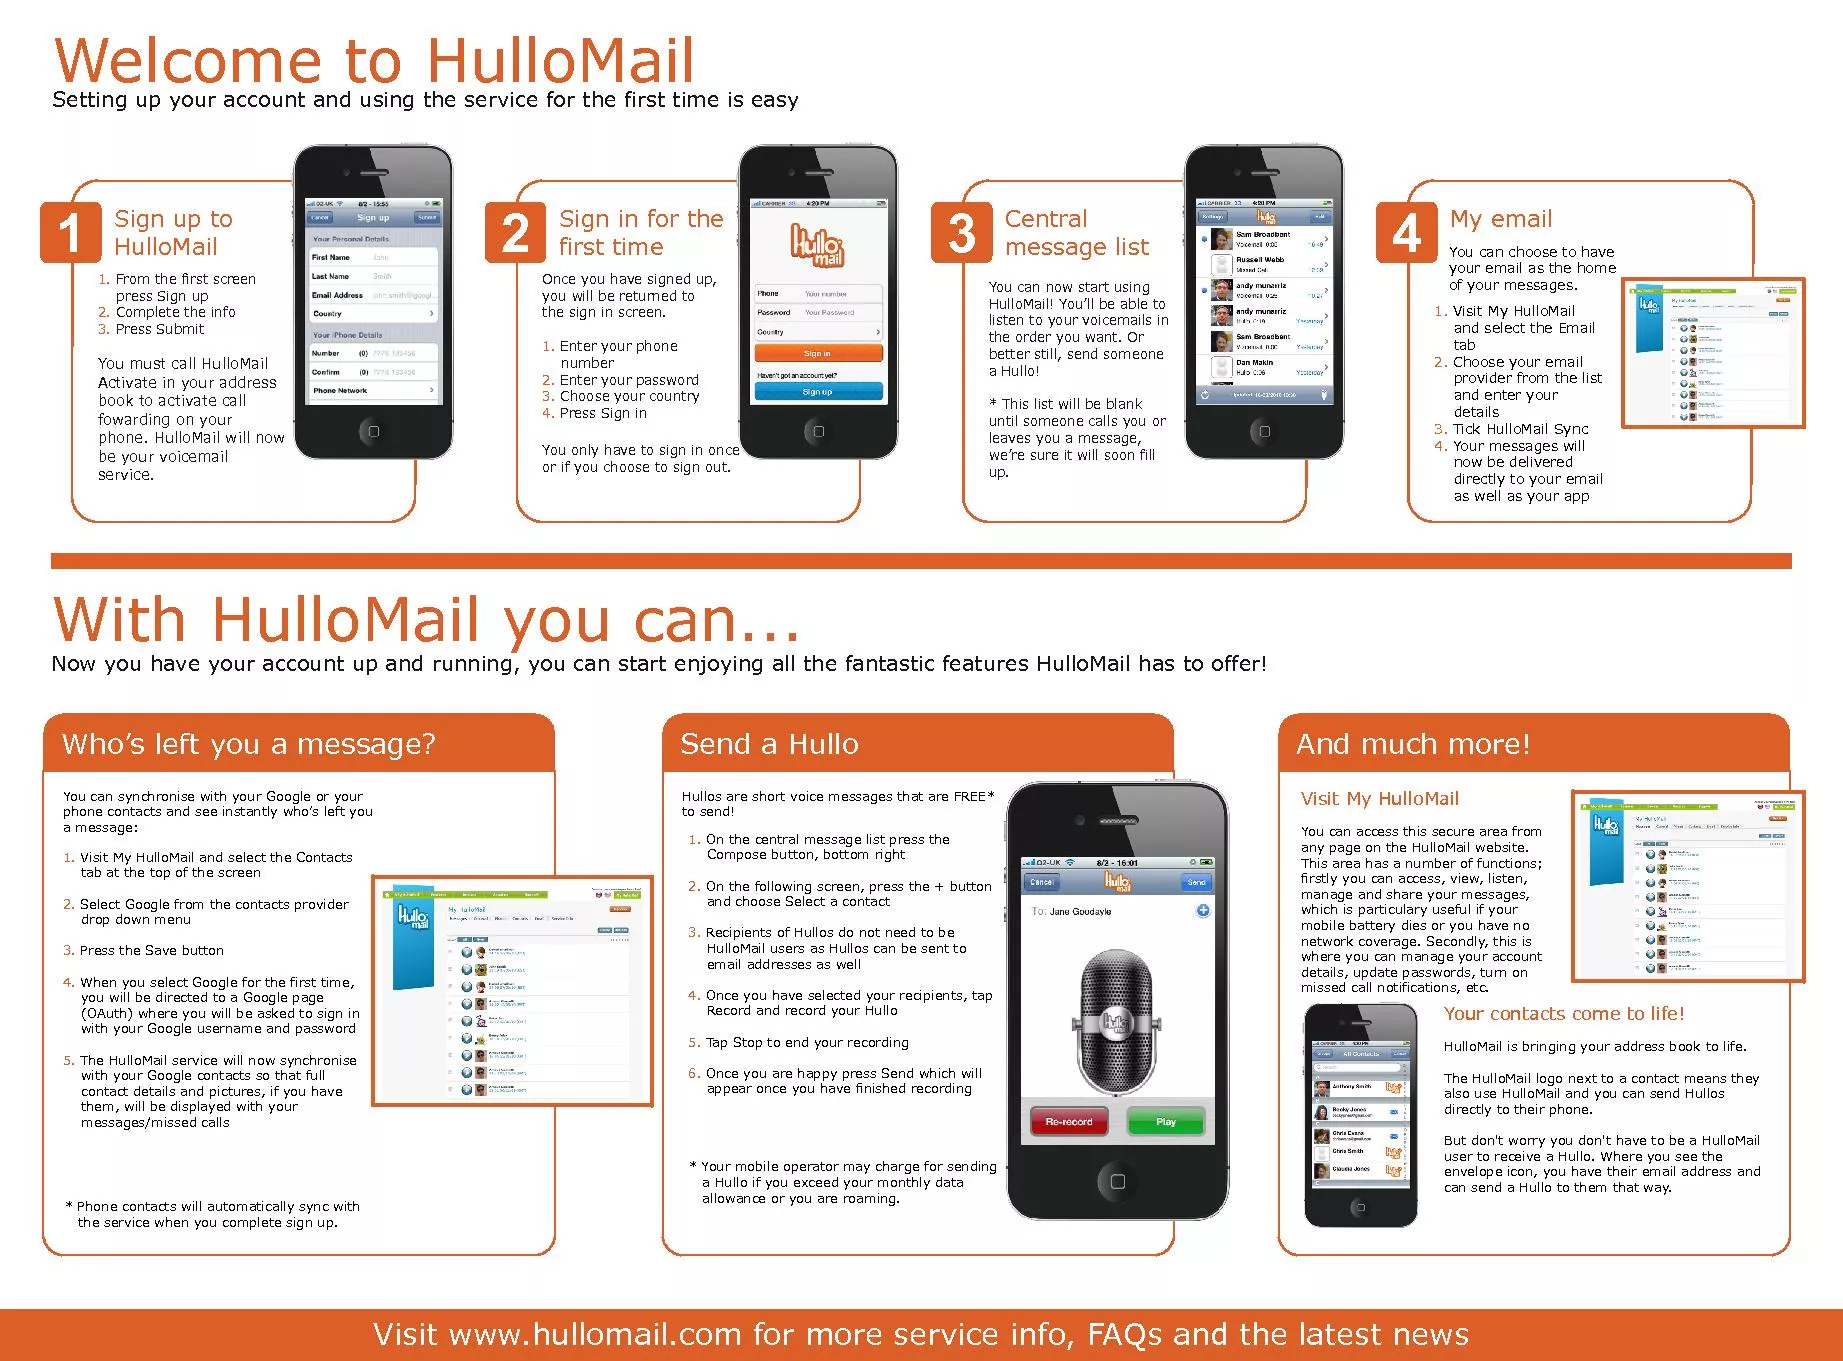 Visit www.hullomail.com for more service info, FAQs and the latest new